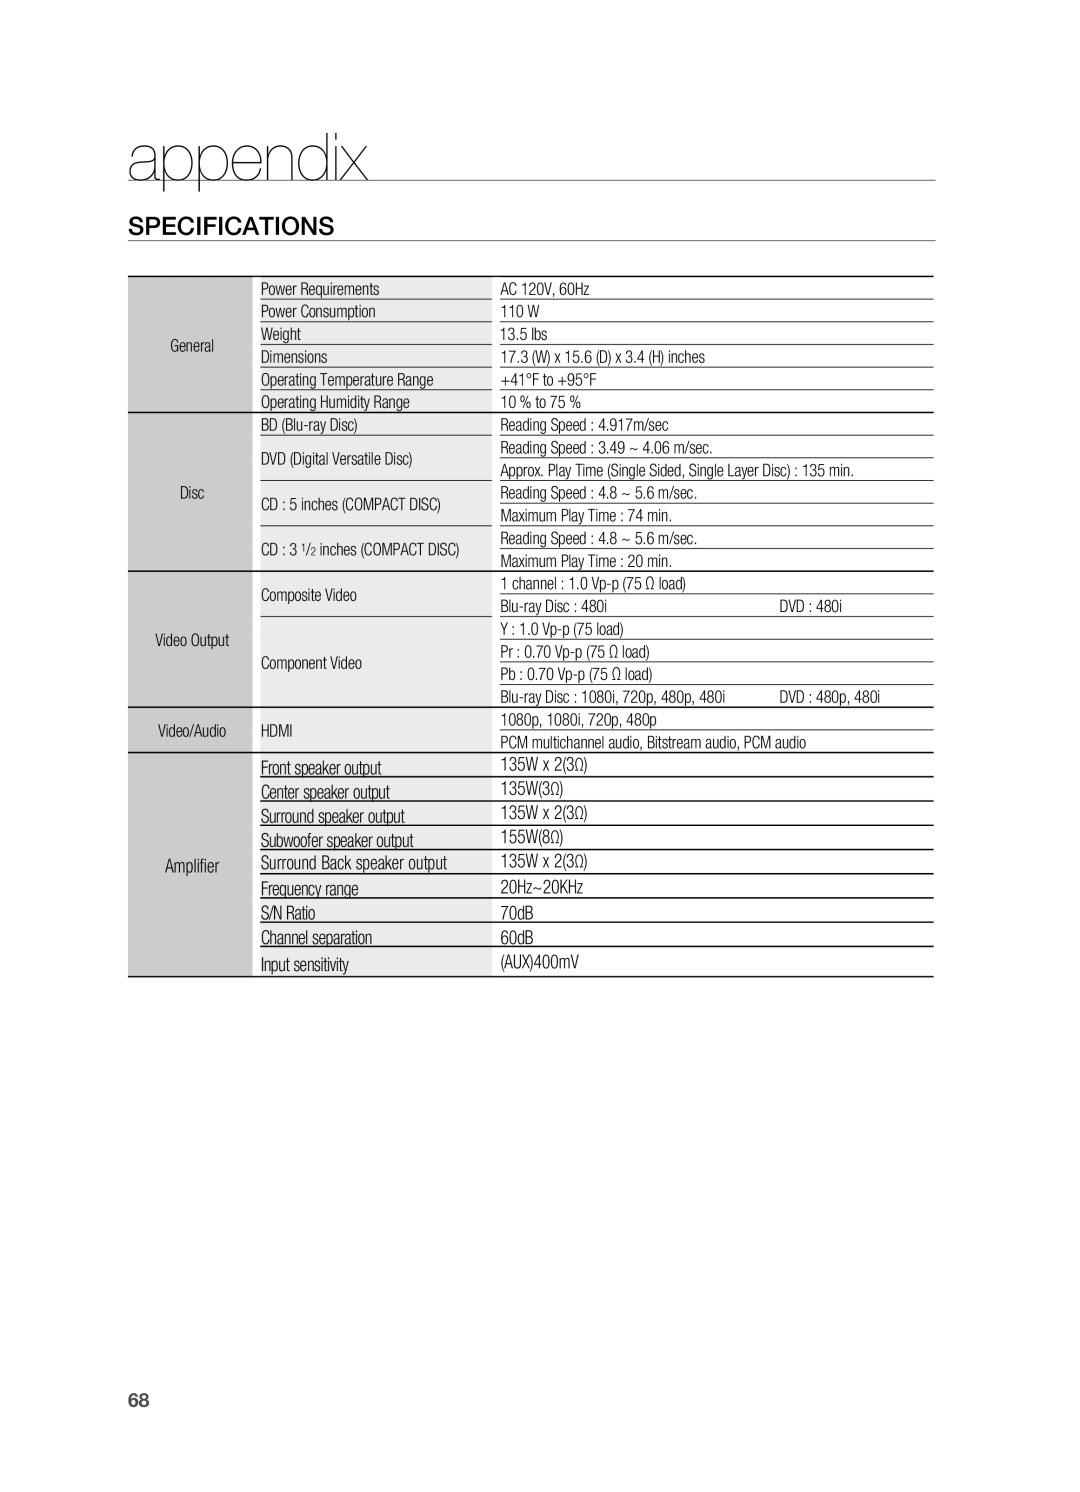 Samsung HT-BD2S manual Specifications, appendix 